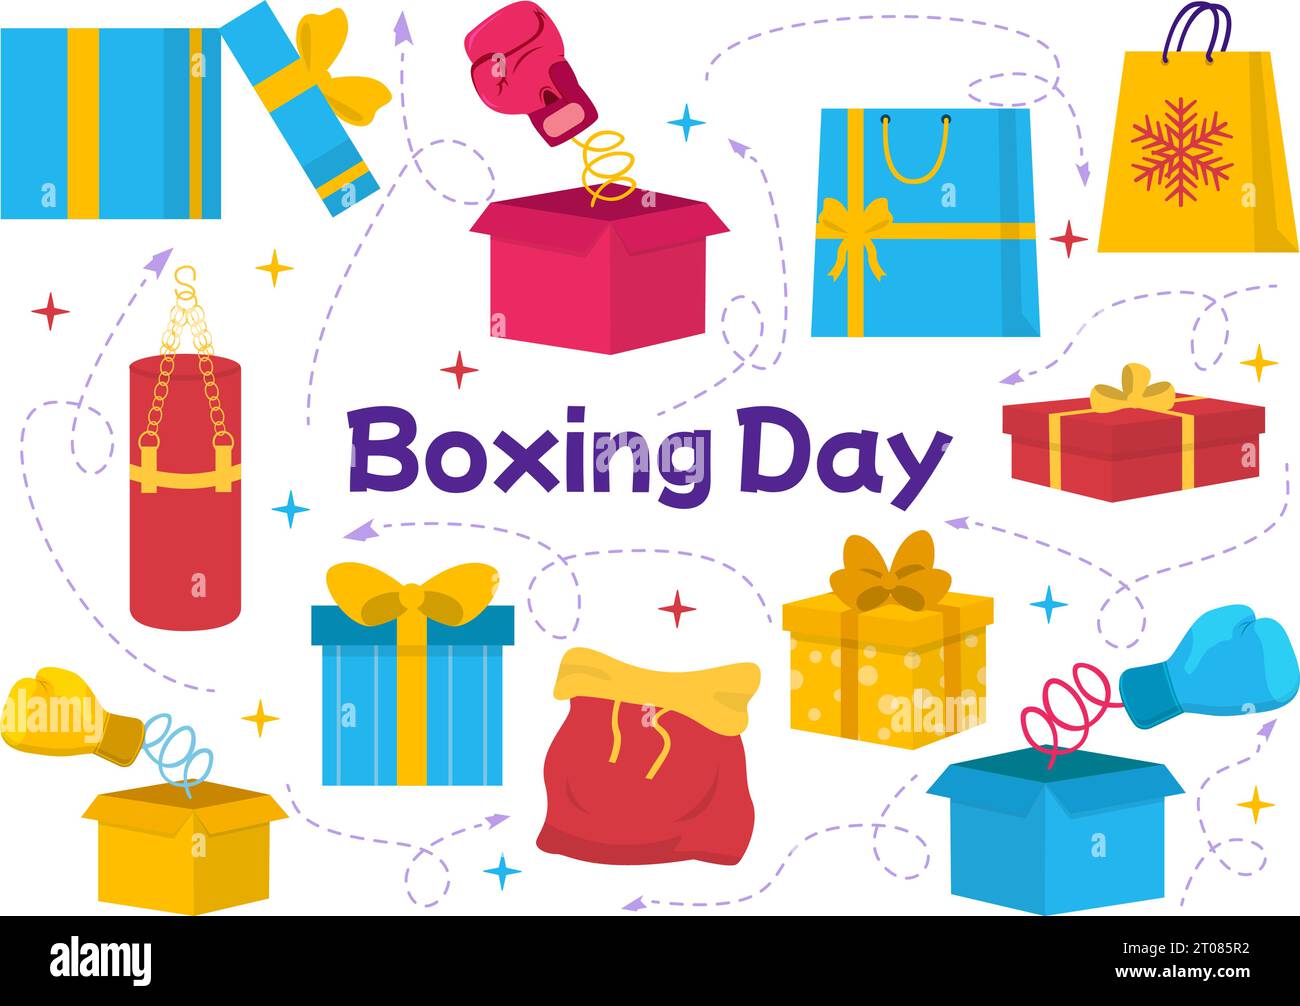 Boxing Day Sale Vector Illustration with Discount Special Offer Tag Price and Gift Box in Flat Cartoon for Promotion Advertising Background Design Stock Vector